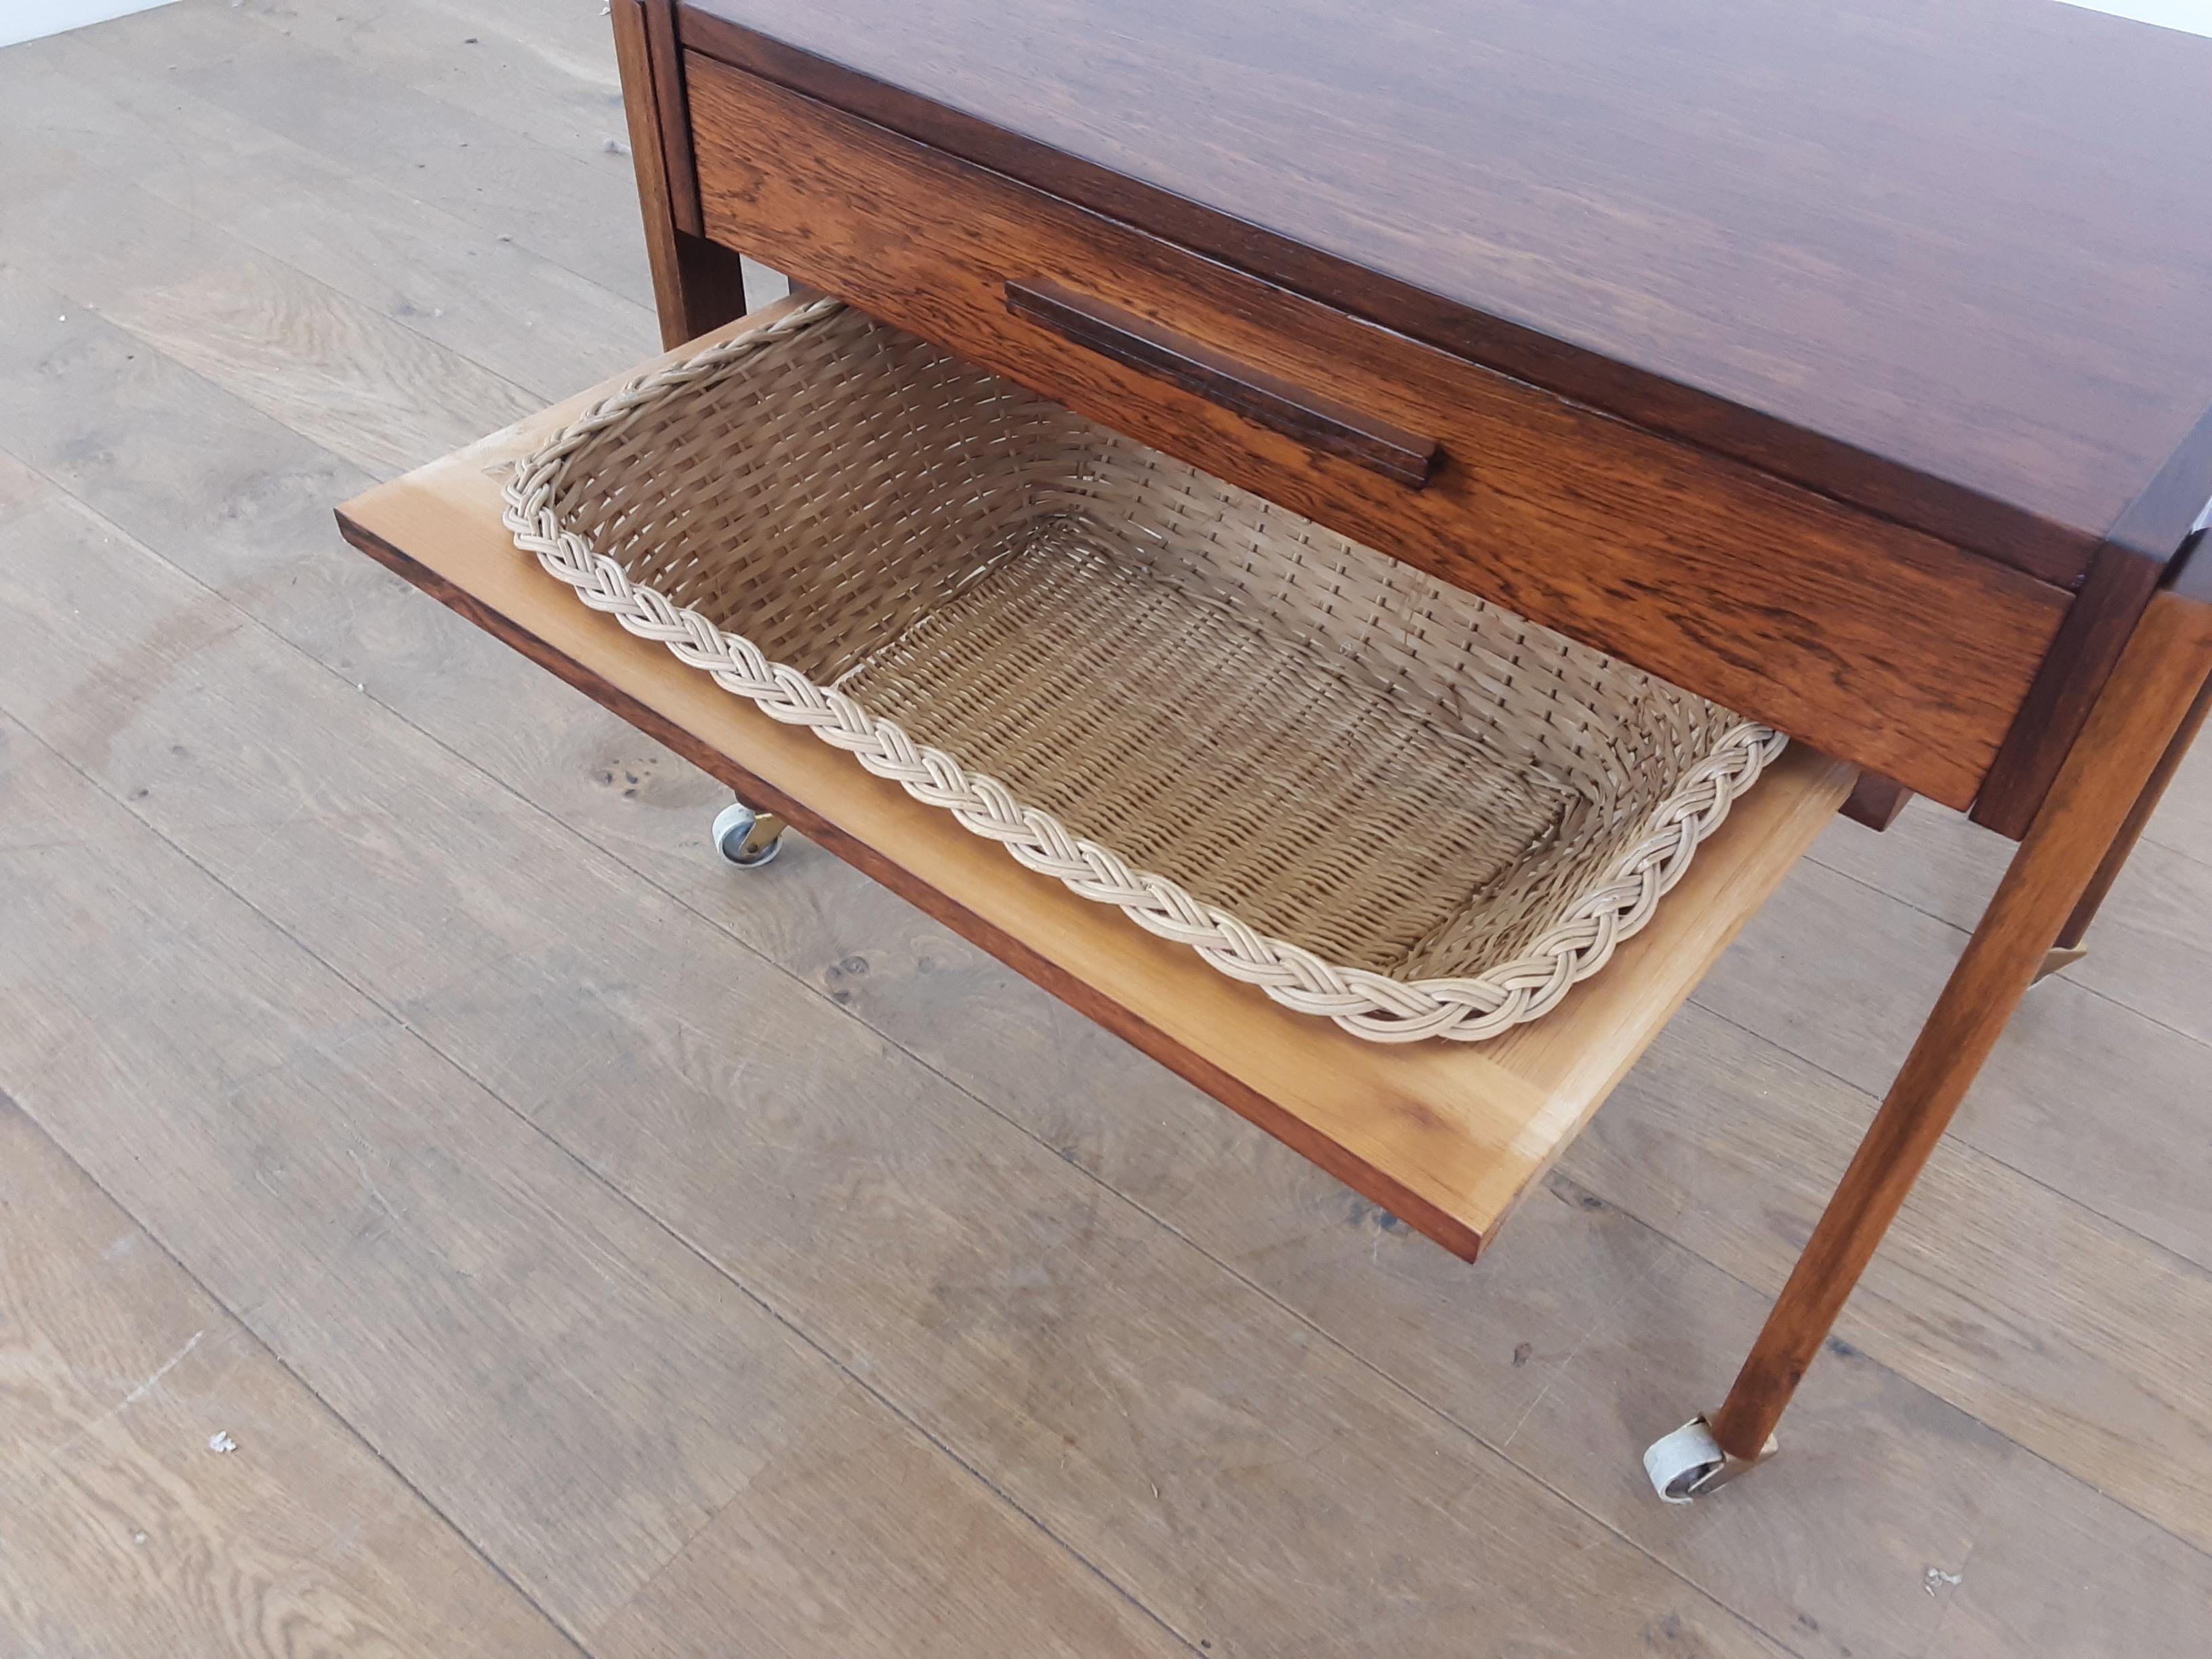 Midcentury Rosewood Table with Sectioned Drawer and Storage Basket For Sale 2